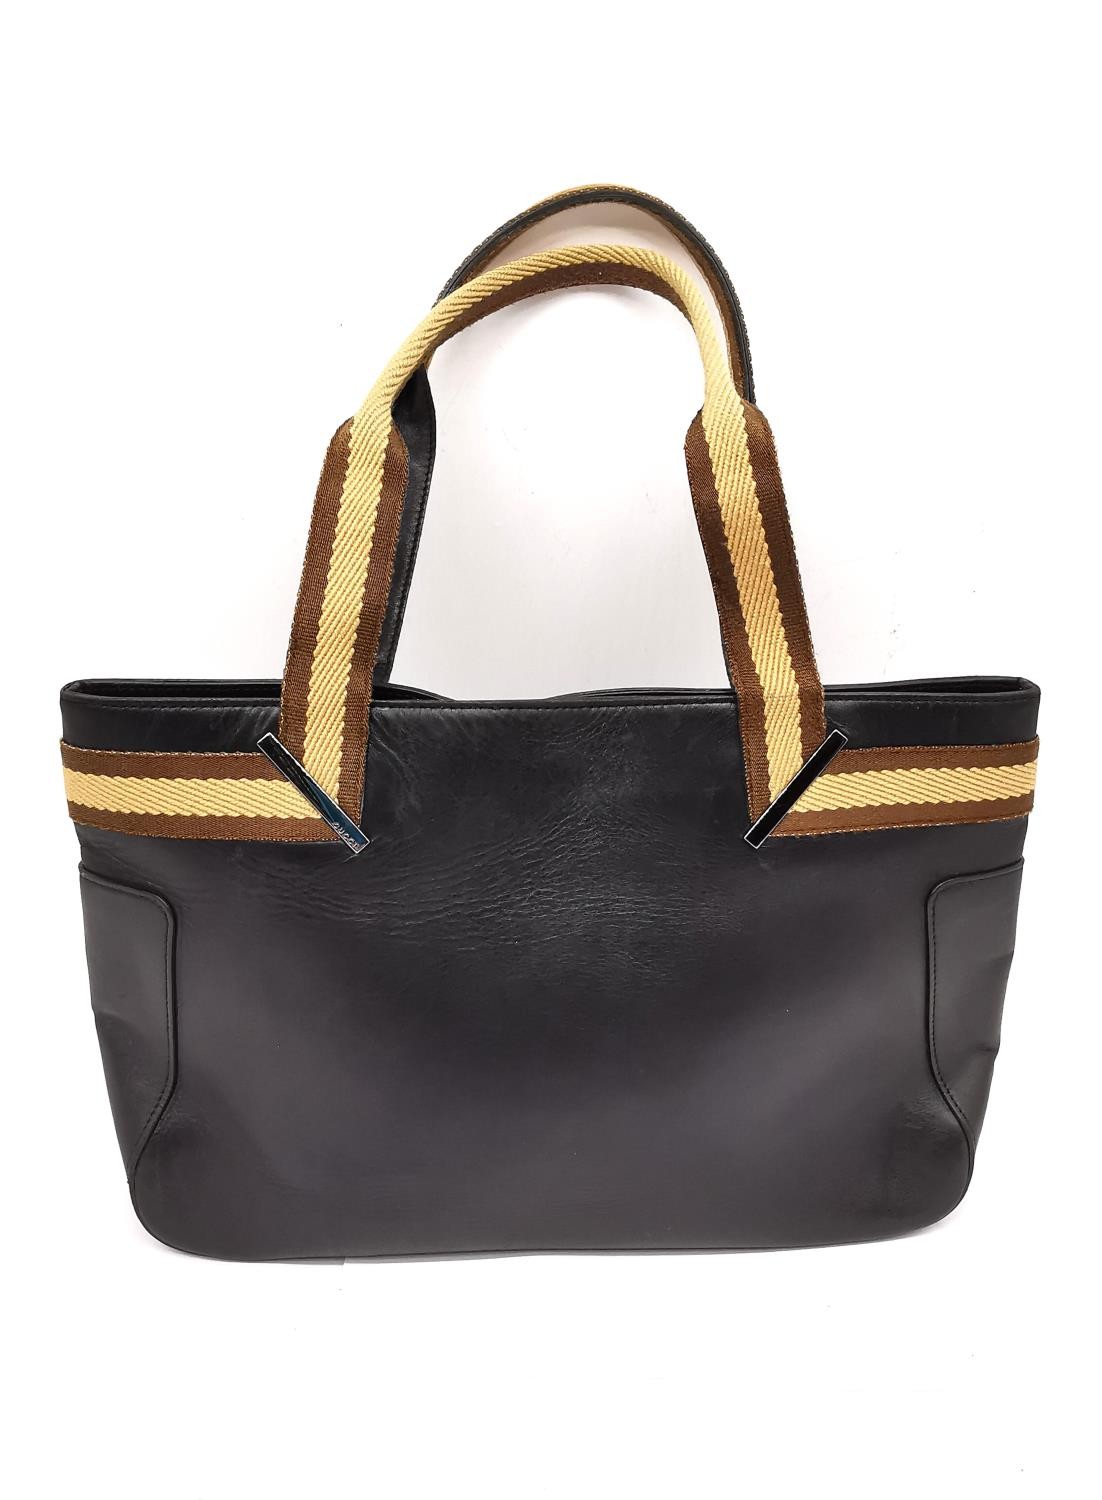 A Gucci Black web leather tote handbag with brown and beige strap. Magnetic snap closure and - Image 5 of 9